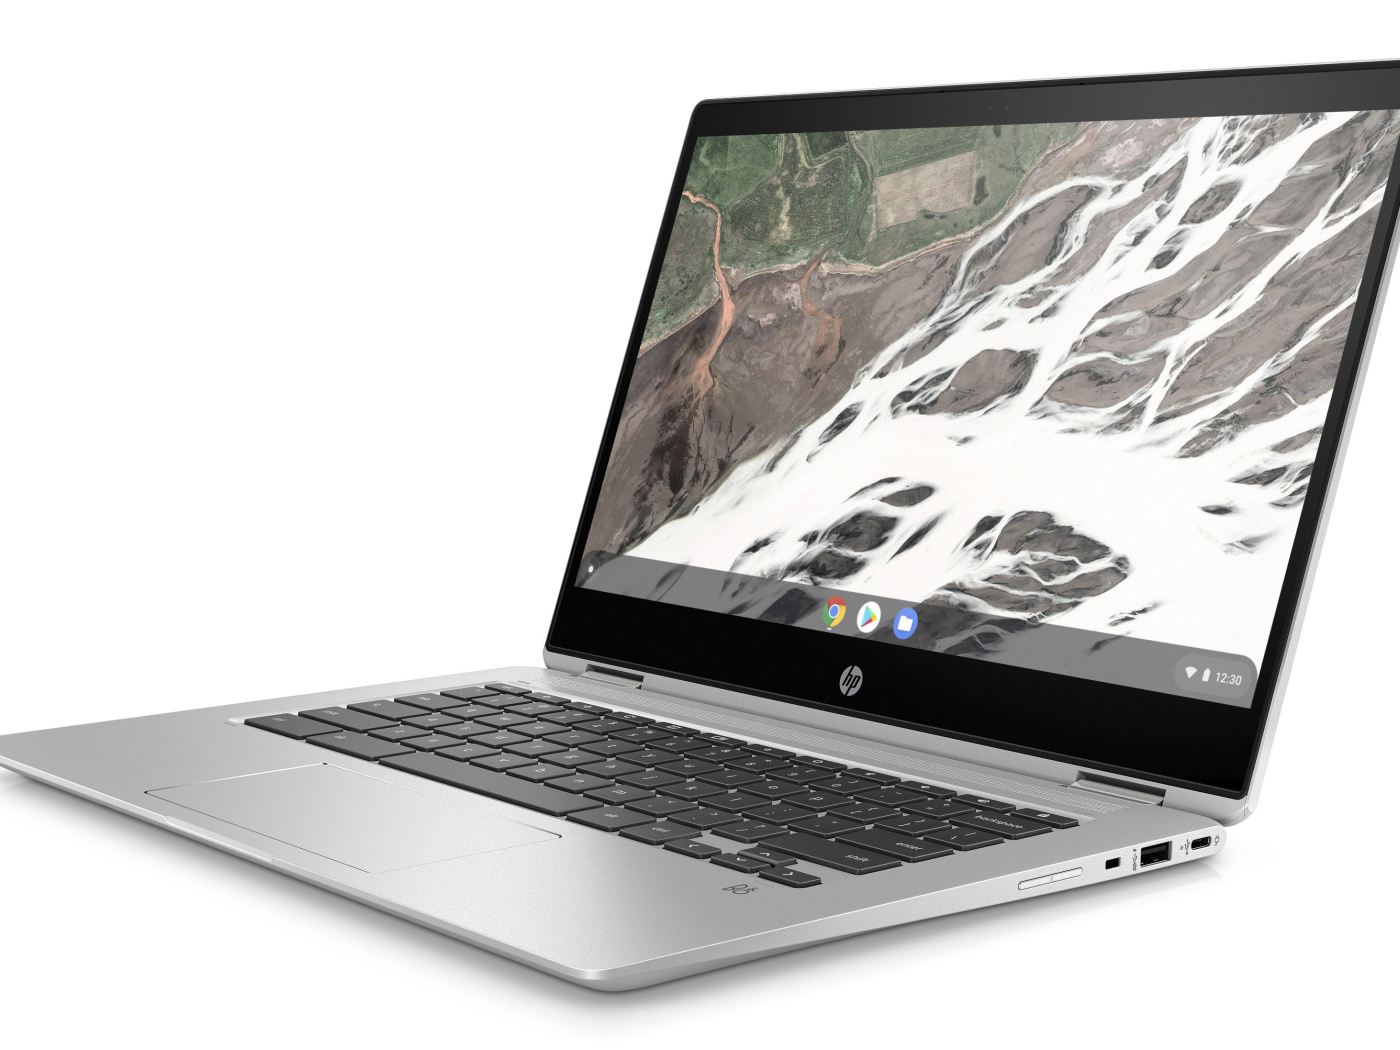 HP Chromebook x360 14 G1 Portable Laptop on White Background, CES 2019